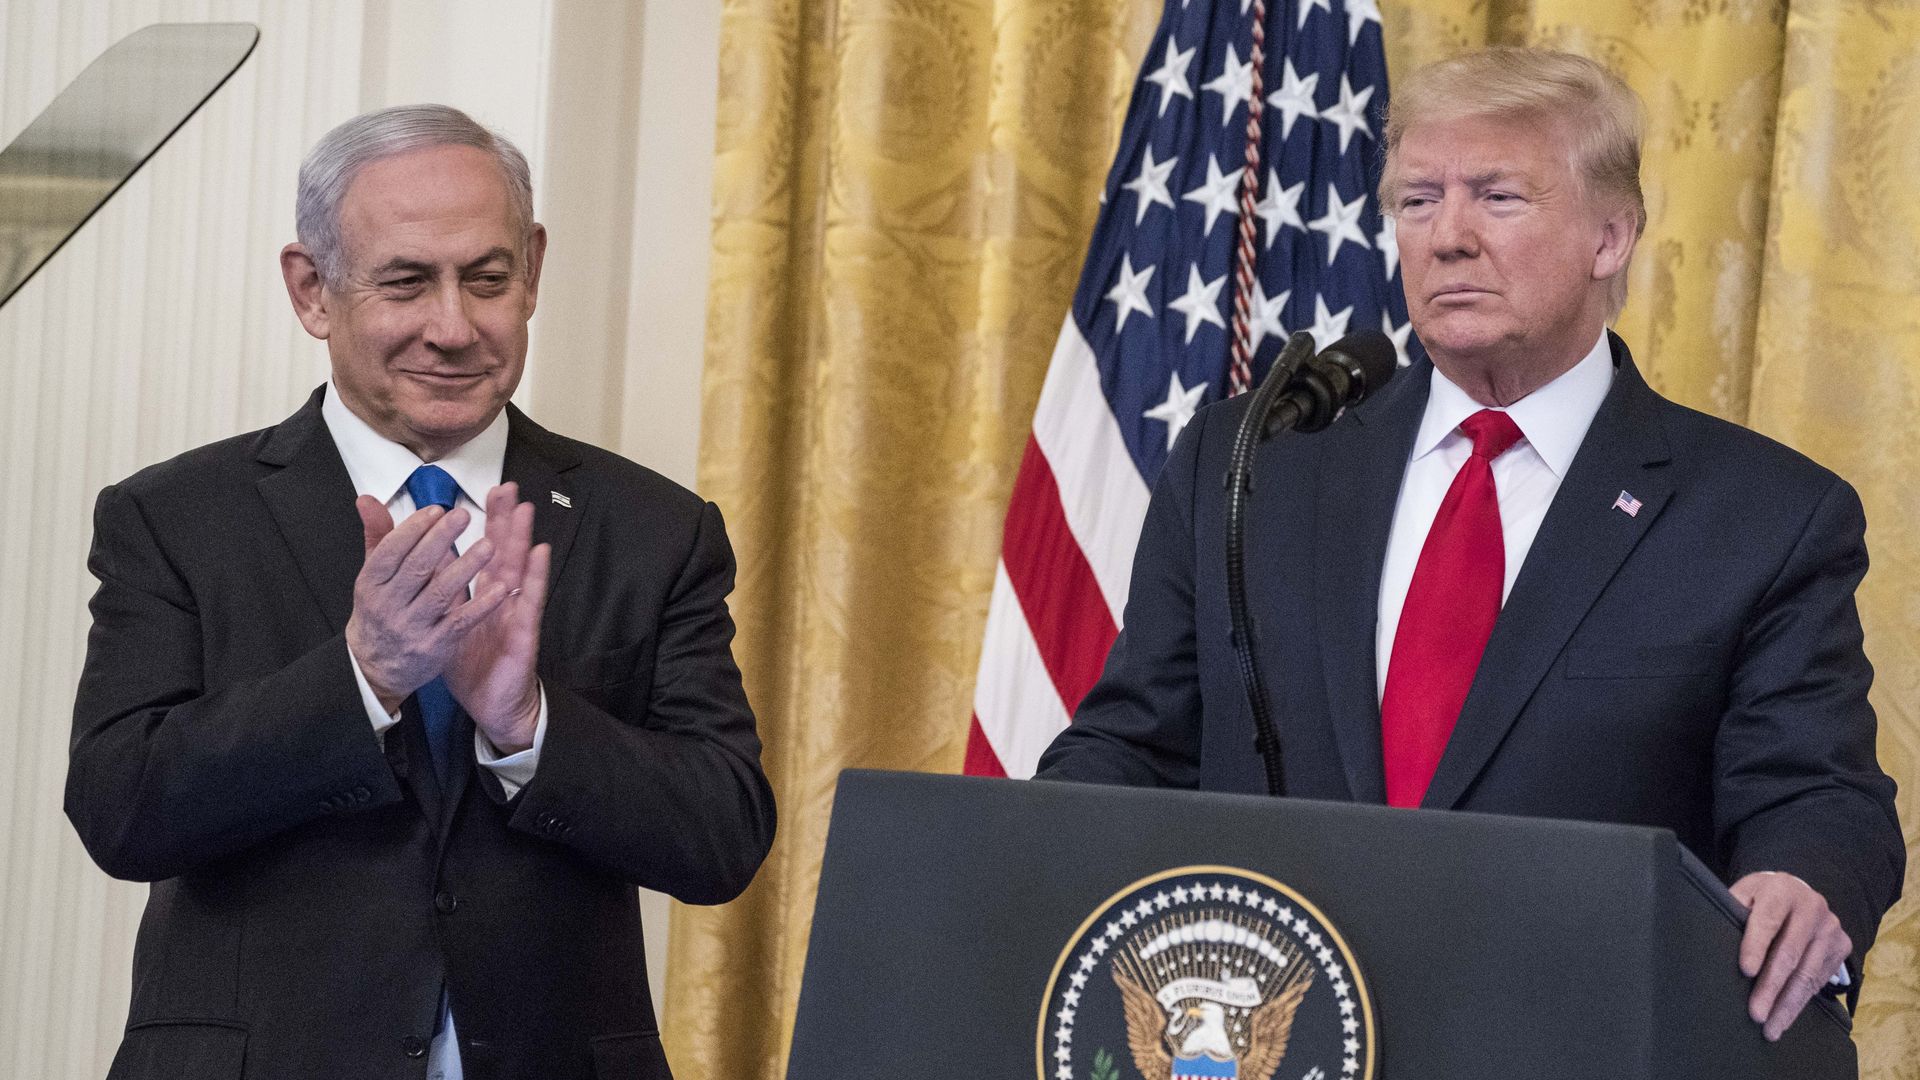 President Donald Trump and Israeli Prime Minister Benjamin Netanyahu participate in a joint statement in the East Room of the White House on January 28